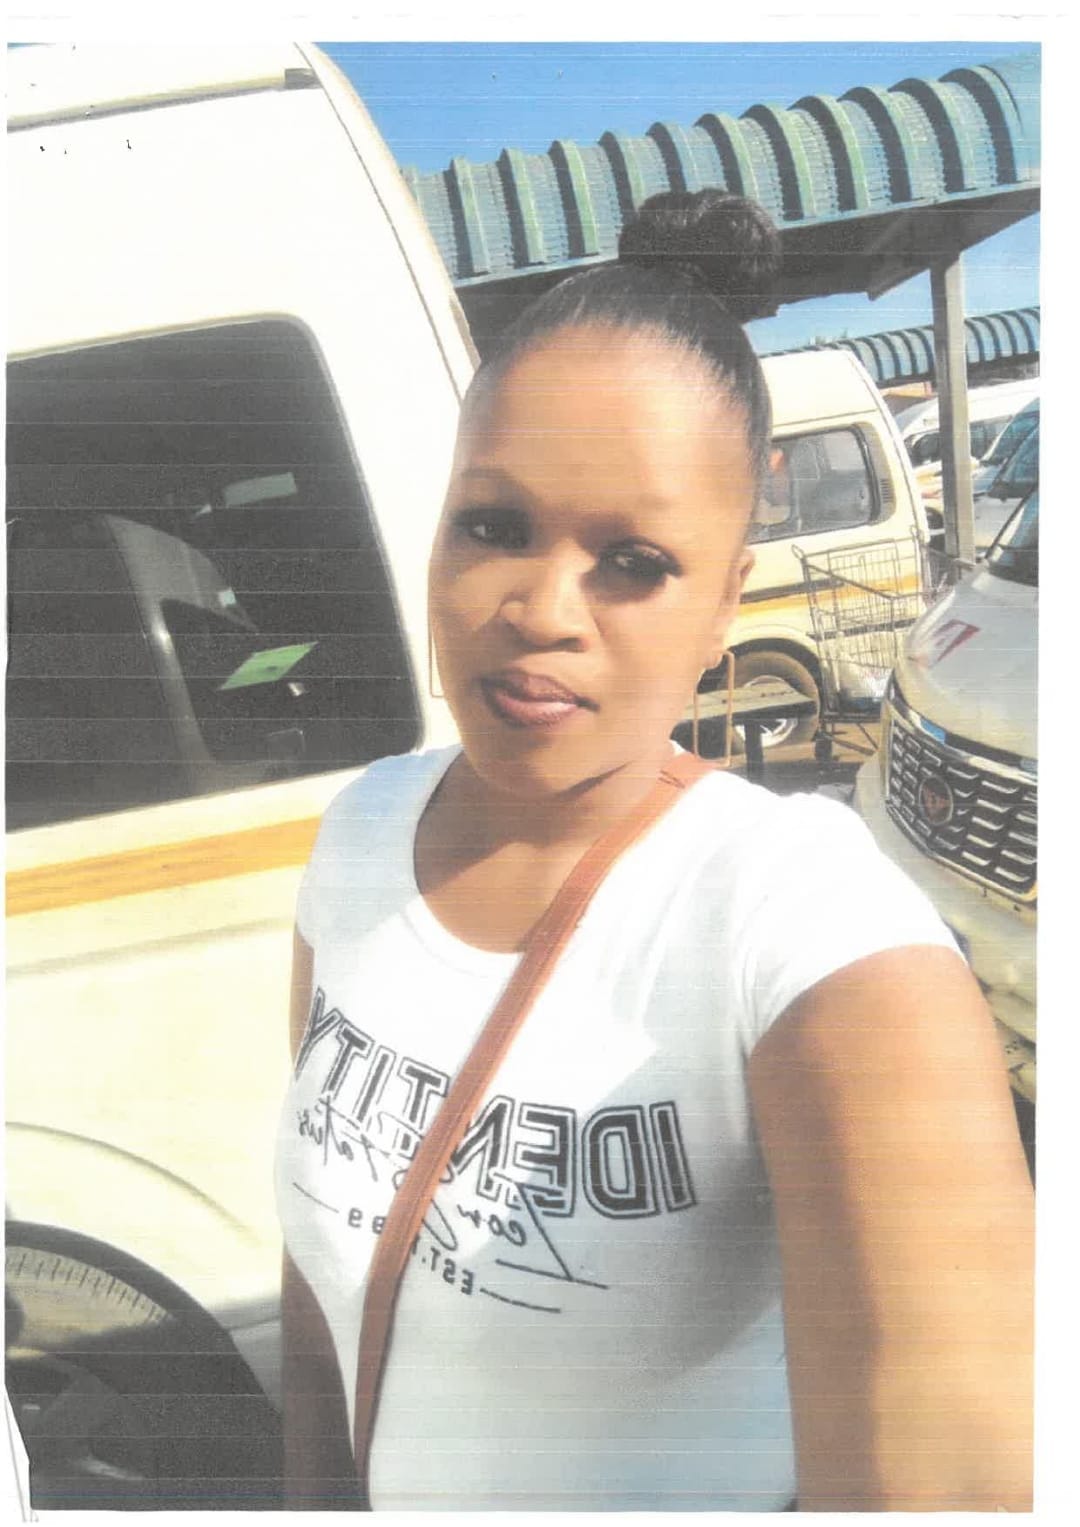 The police in Phokeng request the community's assistance in locating missing Zianda Siyephu